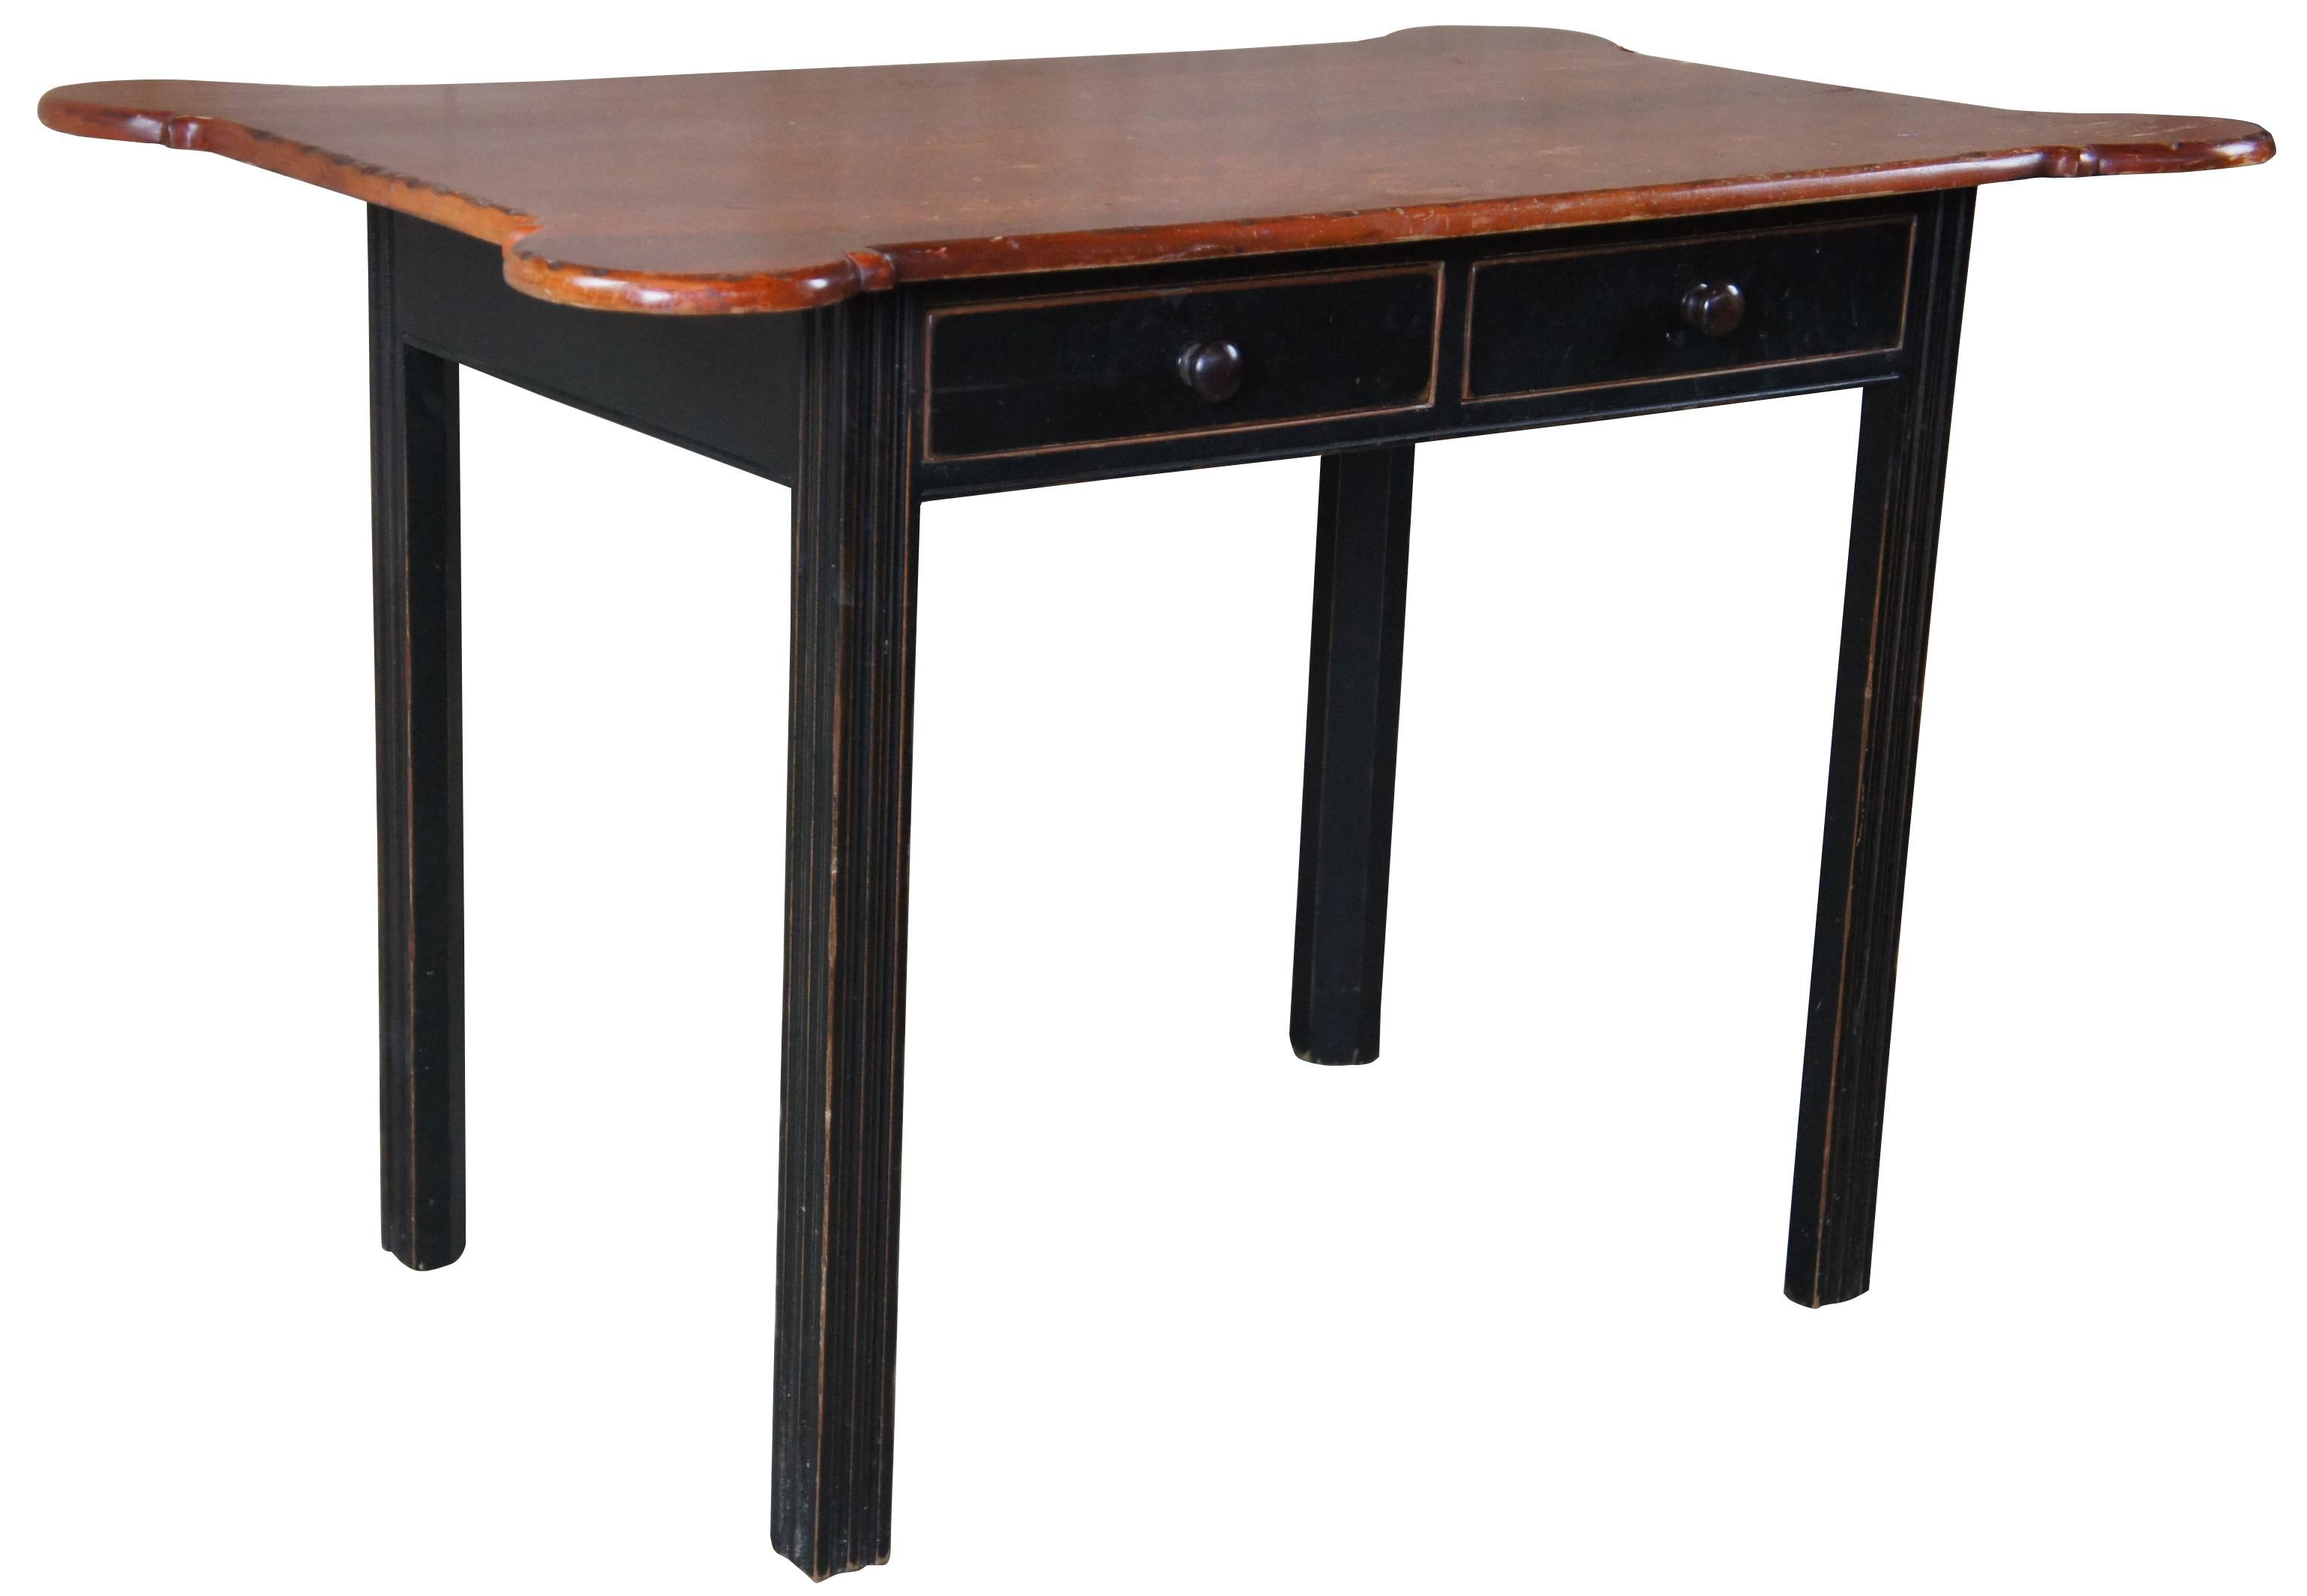 Late 20th century porringer top table by David T Smith. Features a parcel ebonized base in traditional fasion with fluted legs. Includes two dovetailed drawers marked on the underside, circa 1986.
 